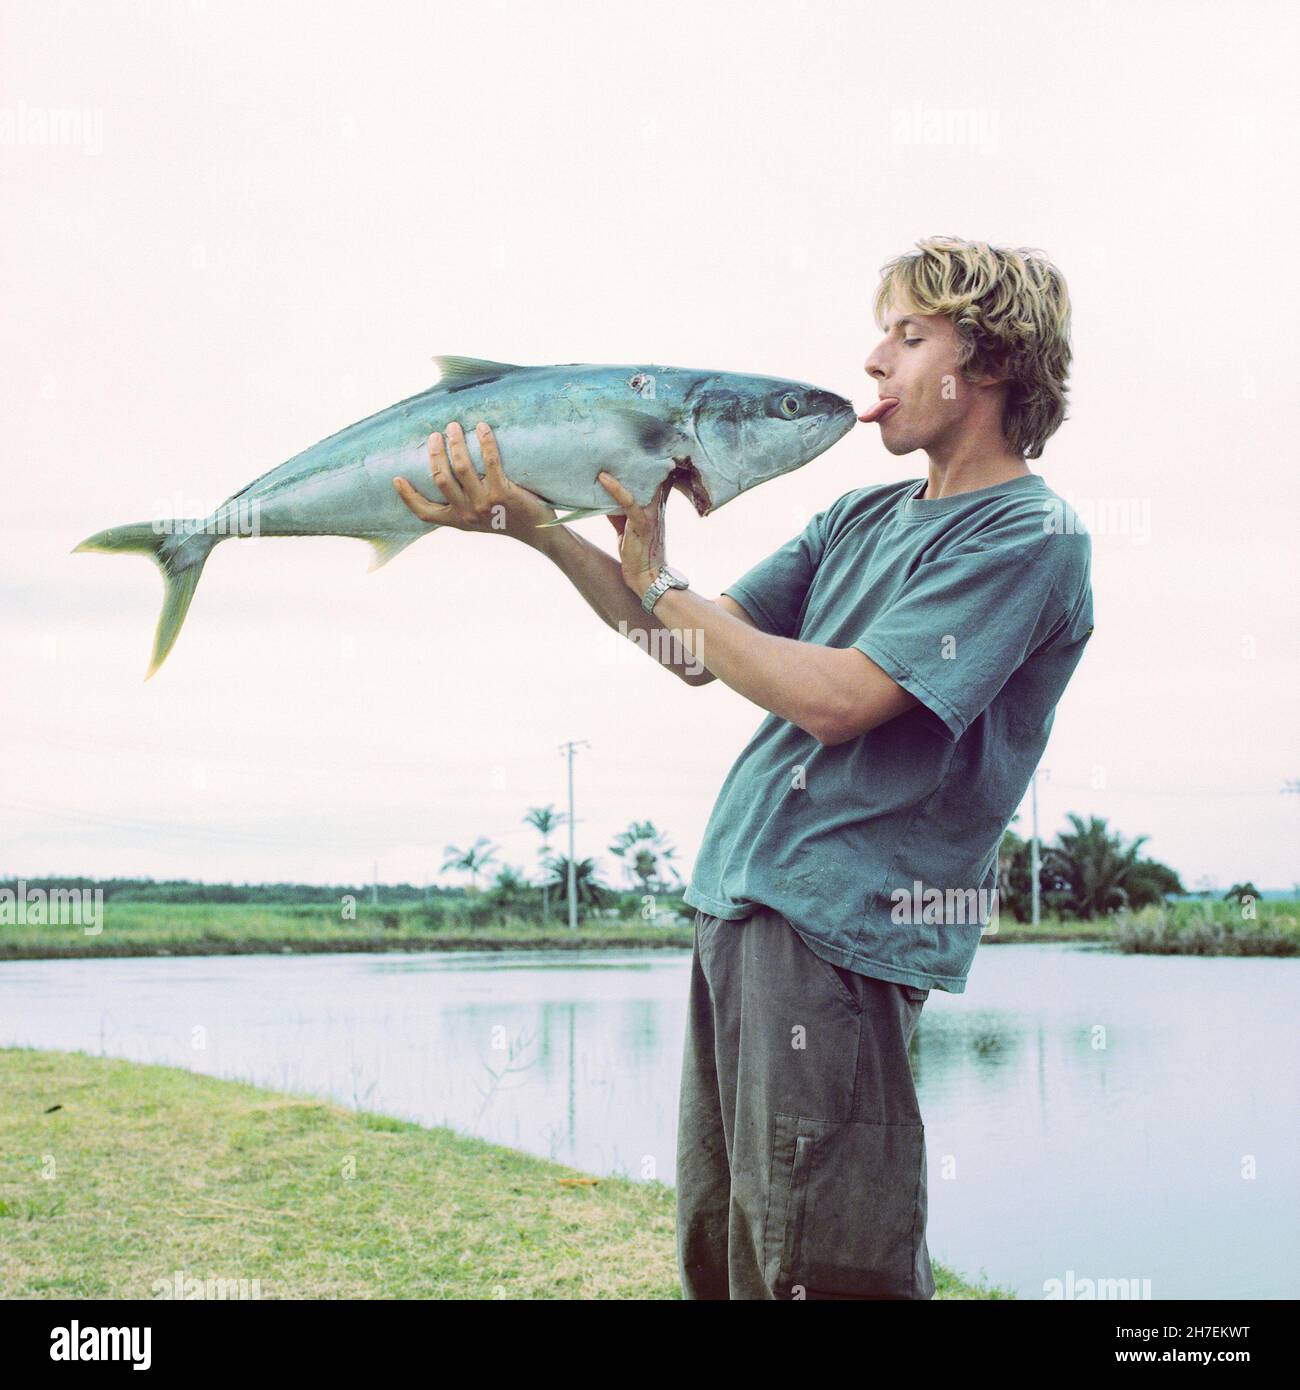 Young man with a large king fish, Queensland Australia. Stock Photo